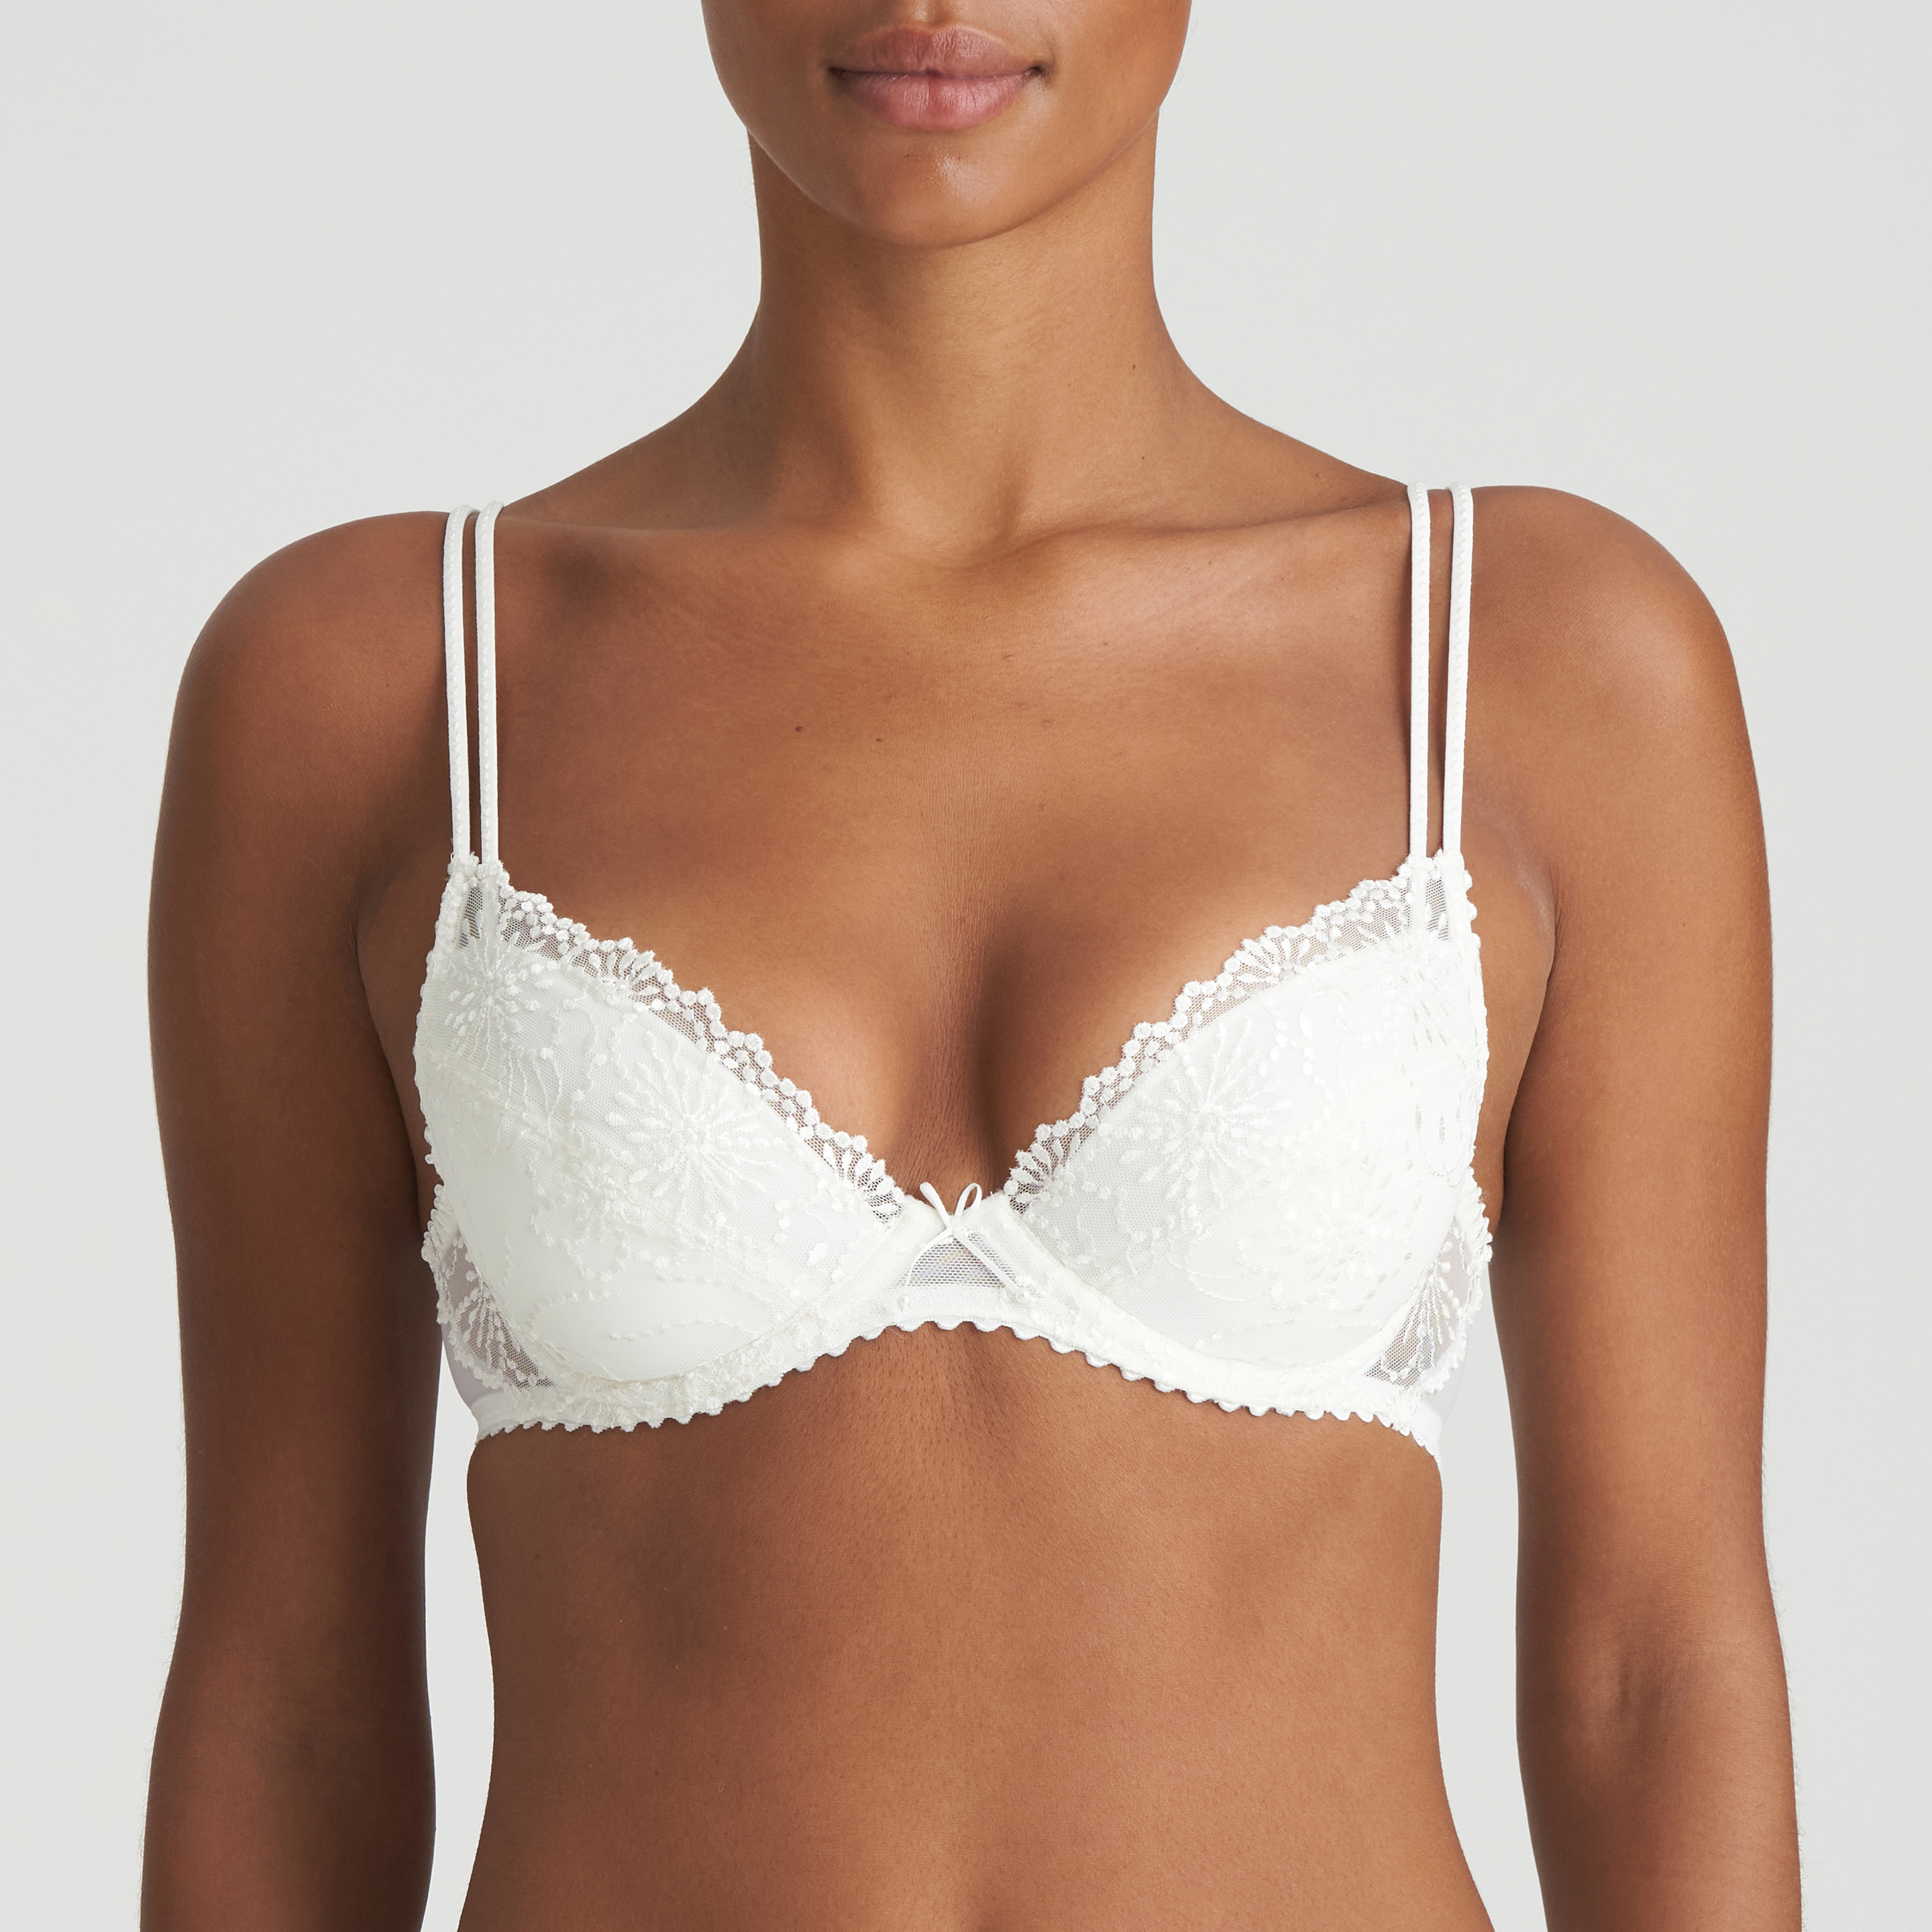 Emporio Armani Women's Daily Charme Push Up Bra with Removable Pads